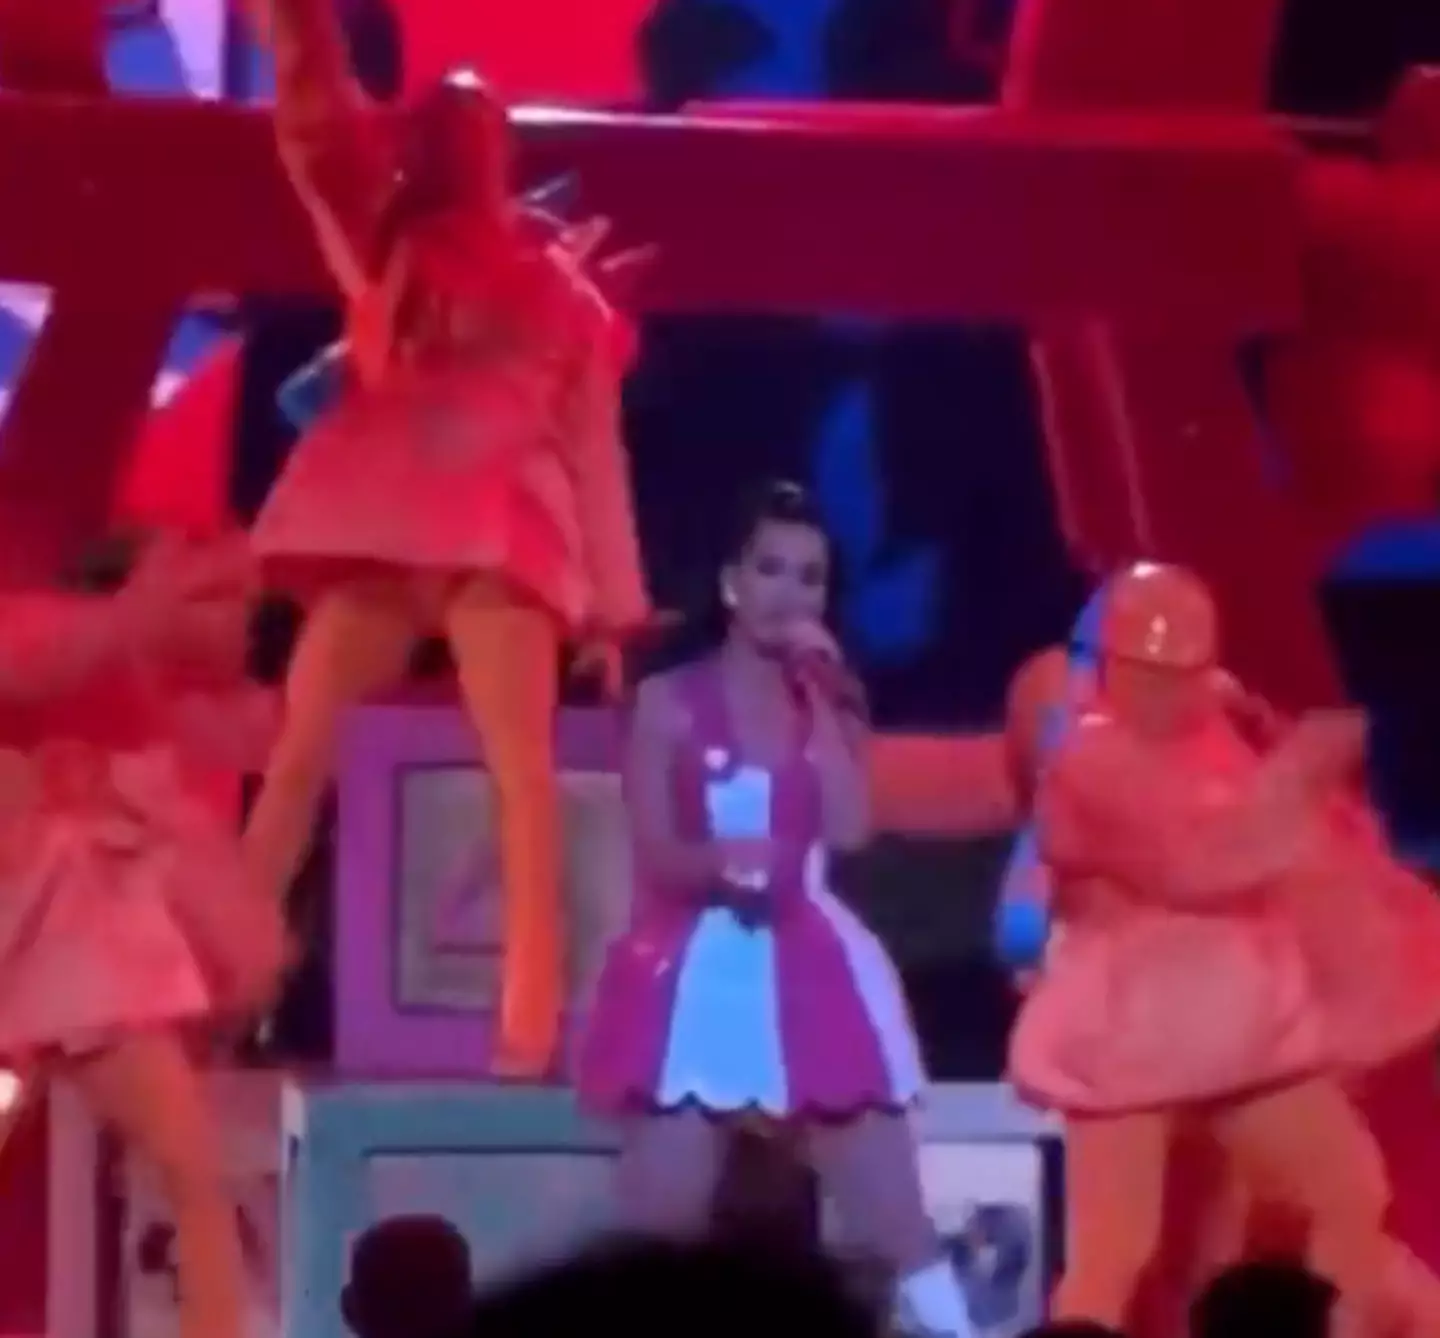 Perry incorporated her clap back into the performance.